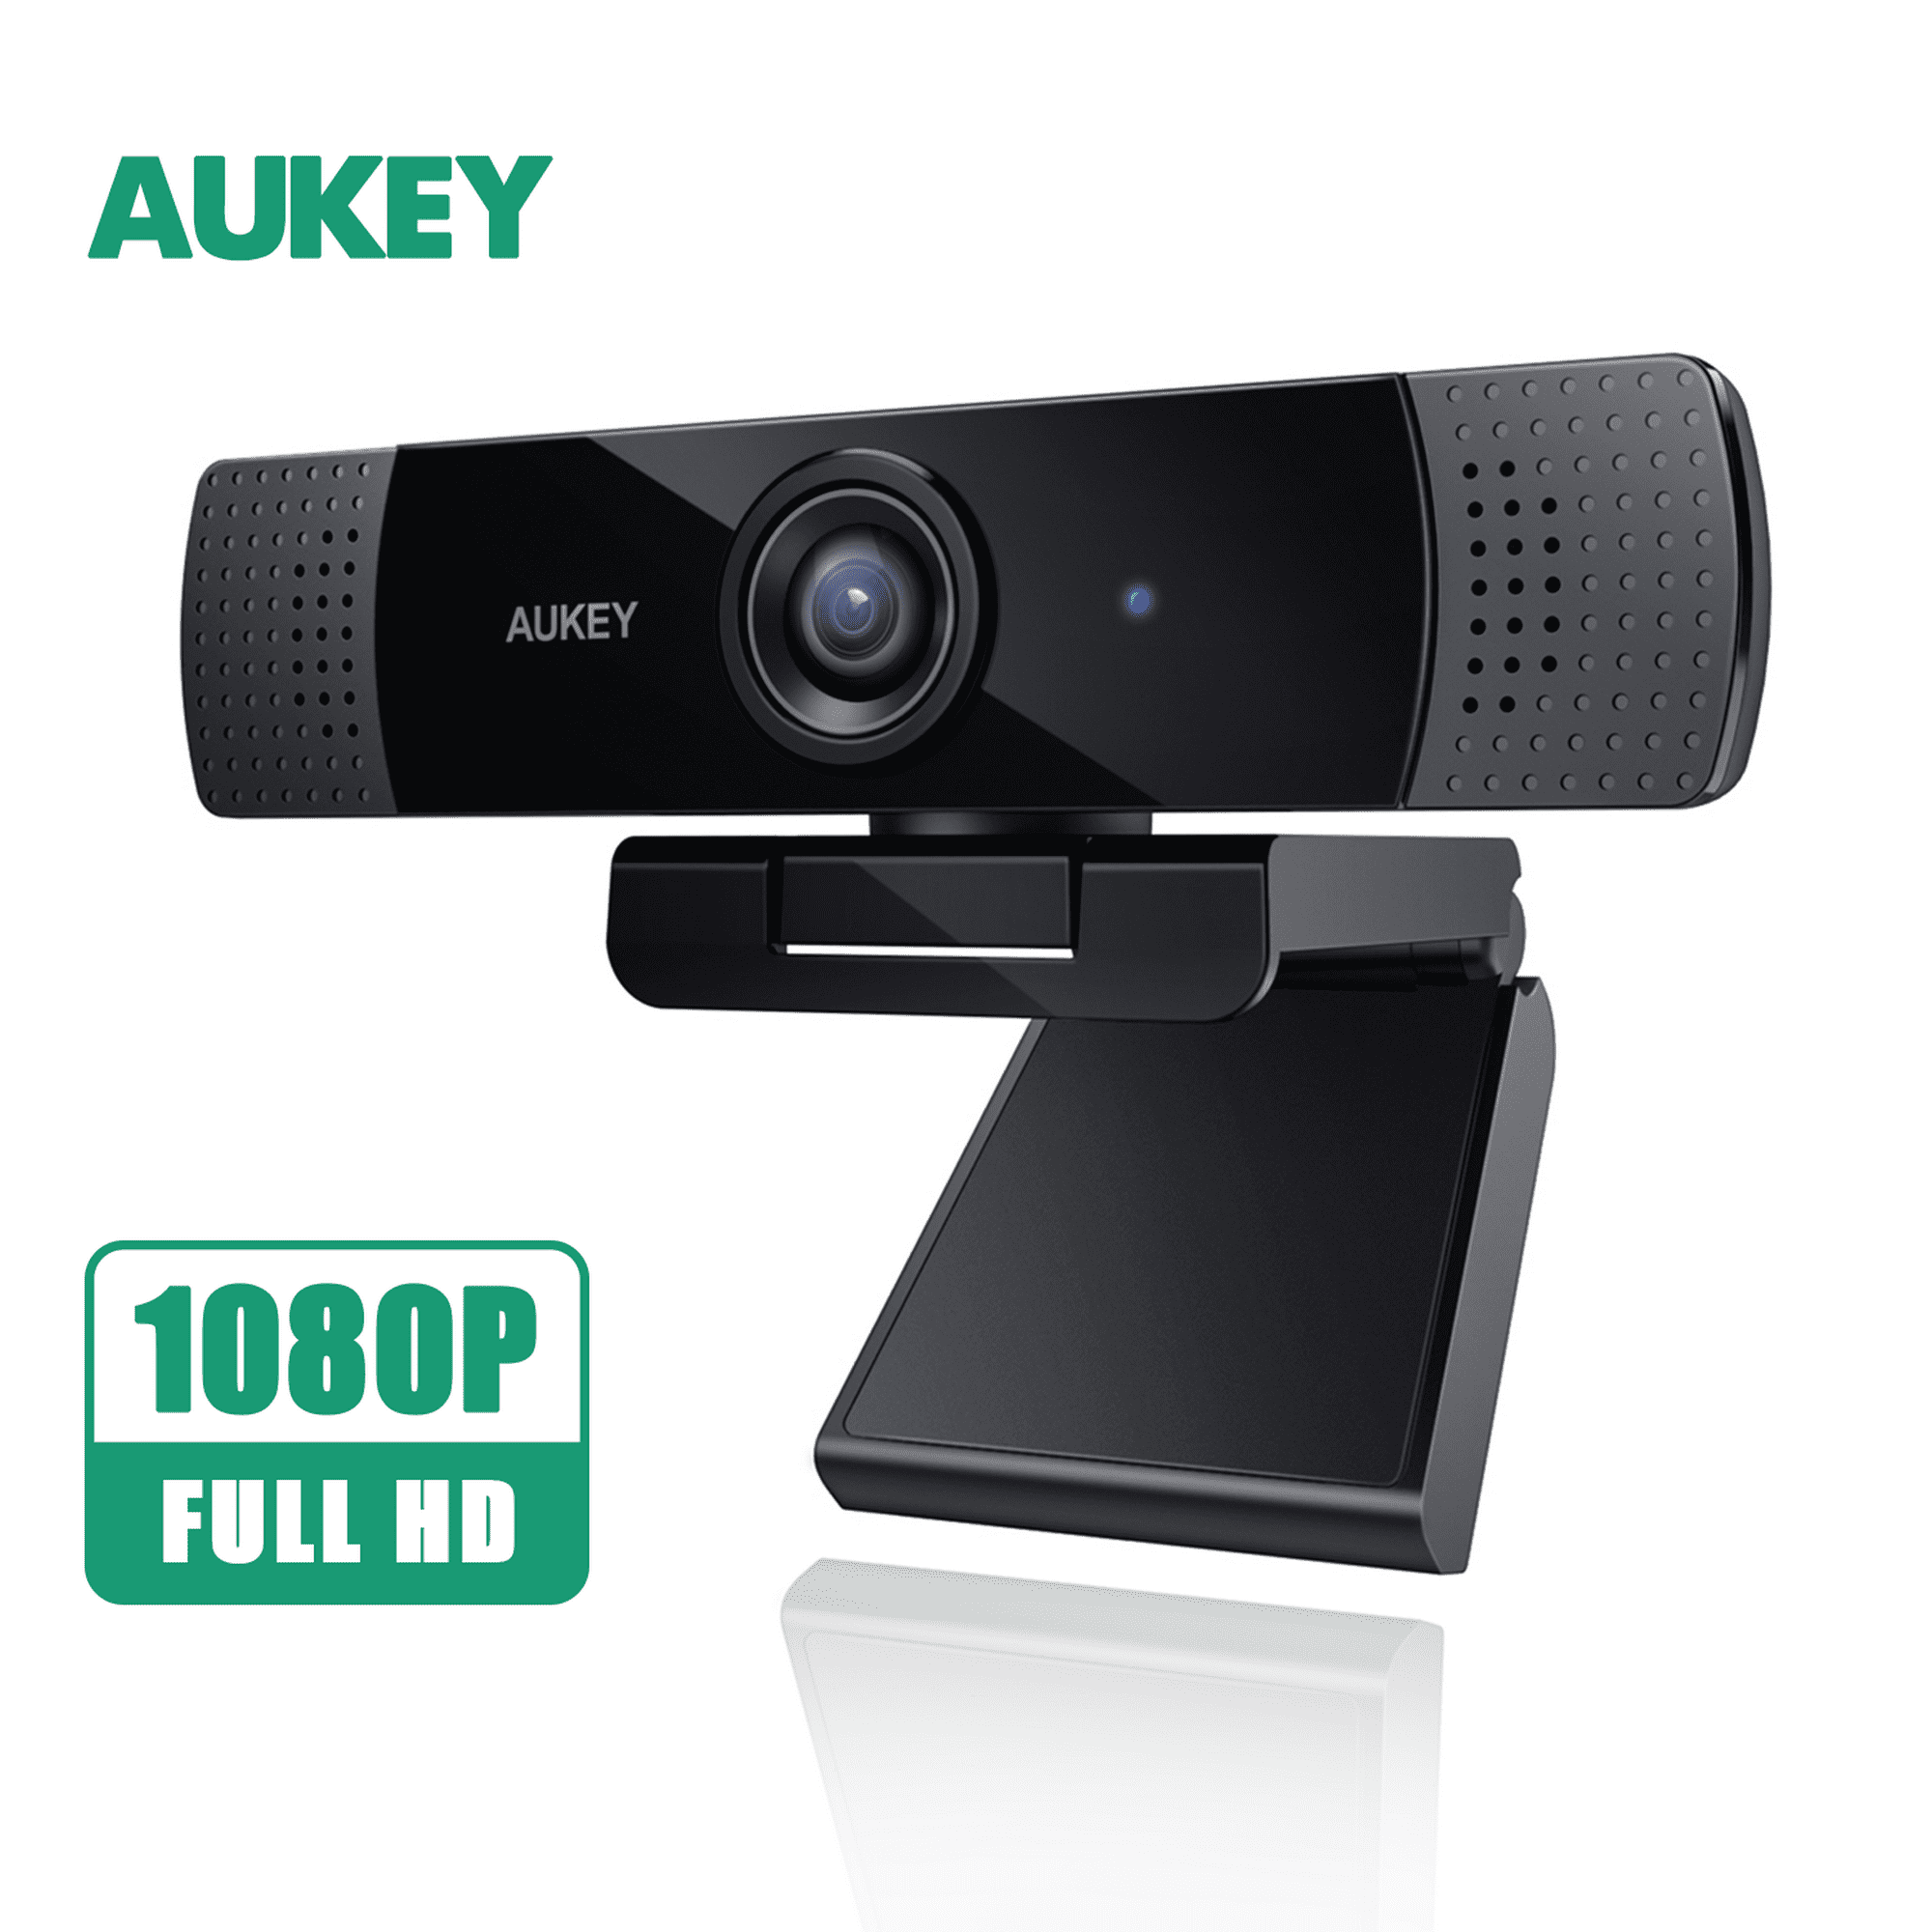 margin violation lettuce AUKEY Webcam, 1080p Live Streaming Camera with Stereo Microphone, Desktop  or Laptop USB Webcam for Widescreen Video Calling and Recording -  Walmart.com